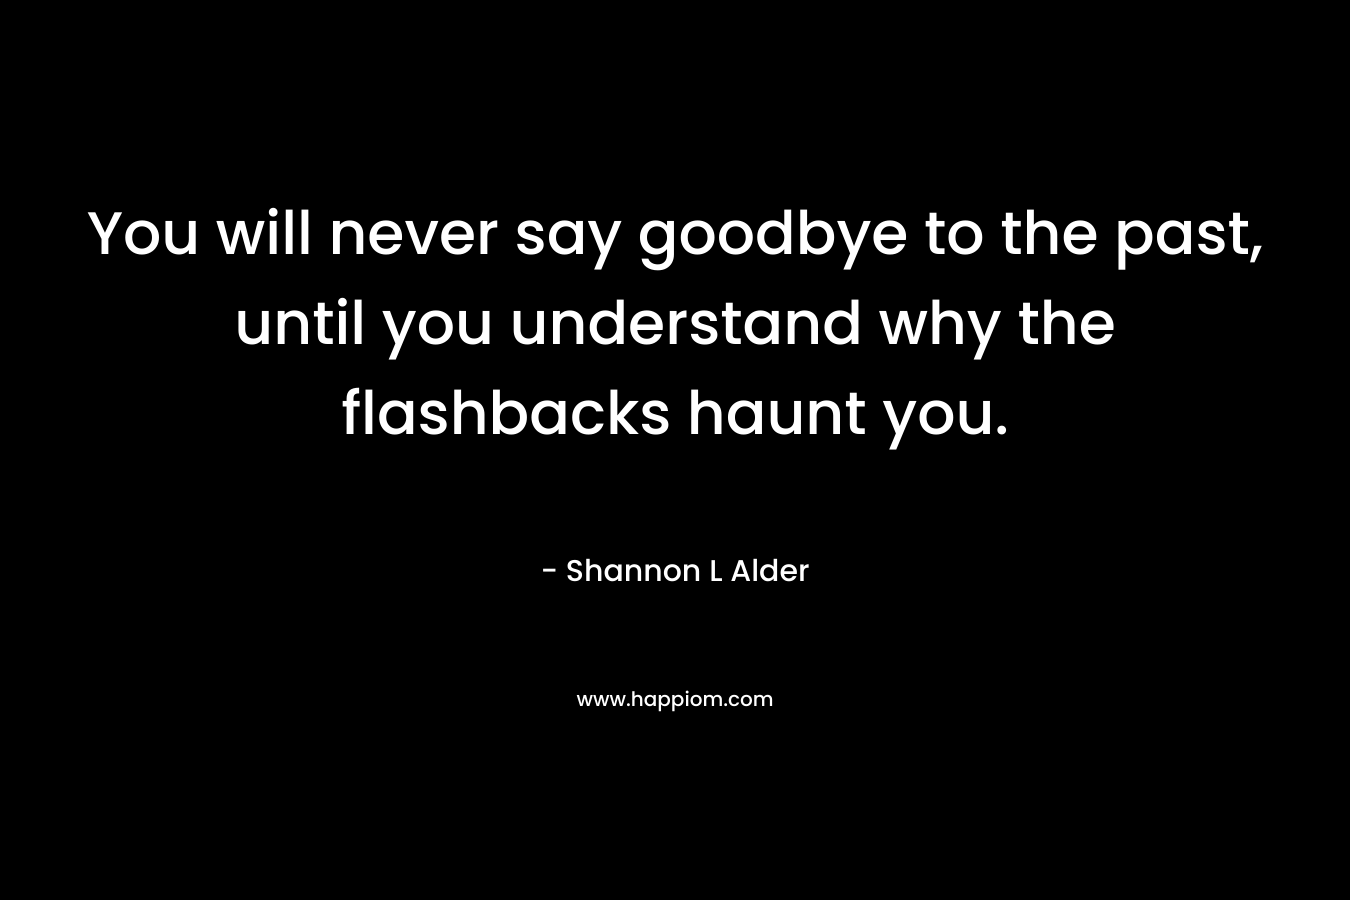 You will never say goodbye to the past, until you understand why the flashbacks haunt you. – Shannon L Alder